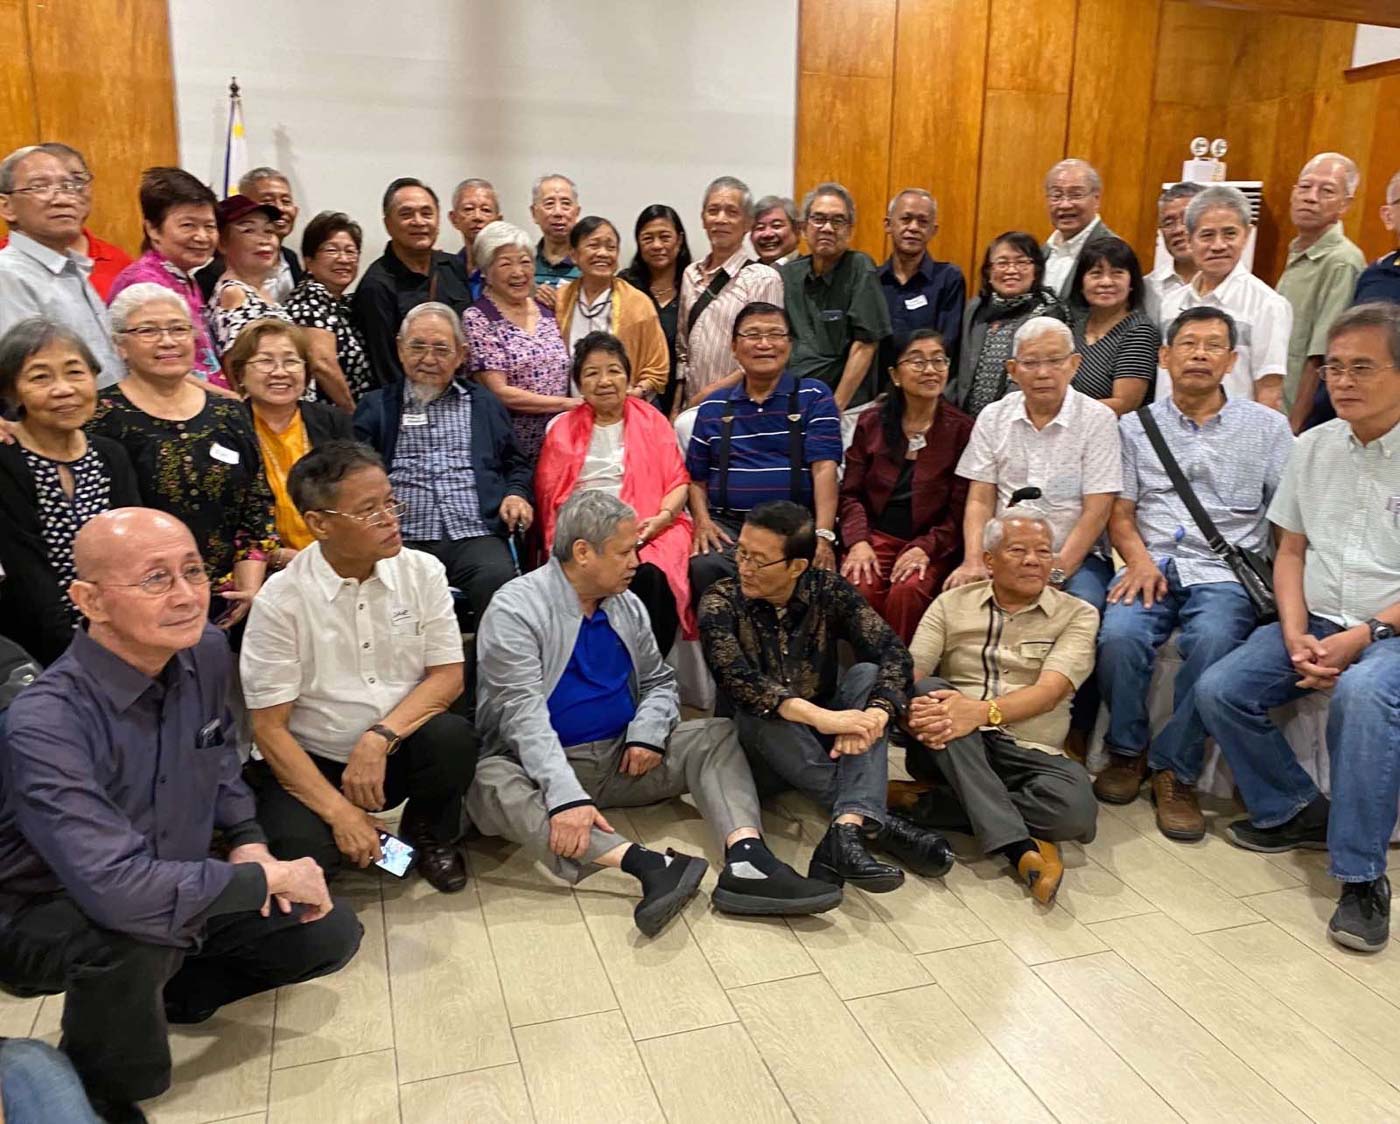 RAGE OF THE '70s. Anti-Marcos activists reunite to commemorate the 50th anniversary of the First Quarter Storm. In photo are Philippine ambassador to China Chito Sta Romana (standing, 6th from right), former human rights commissioner Etta Rosales (seated, middle) and ex-UP president Dodong Nemenzo (seated, middle). Sourced photo